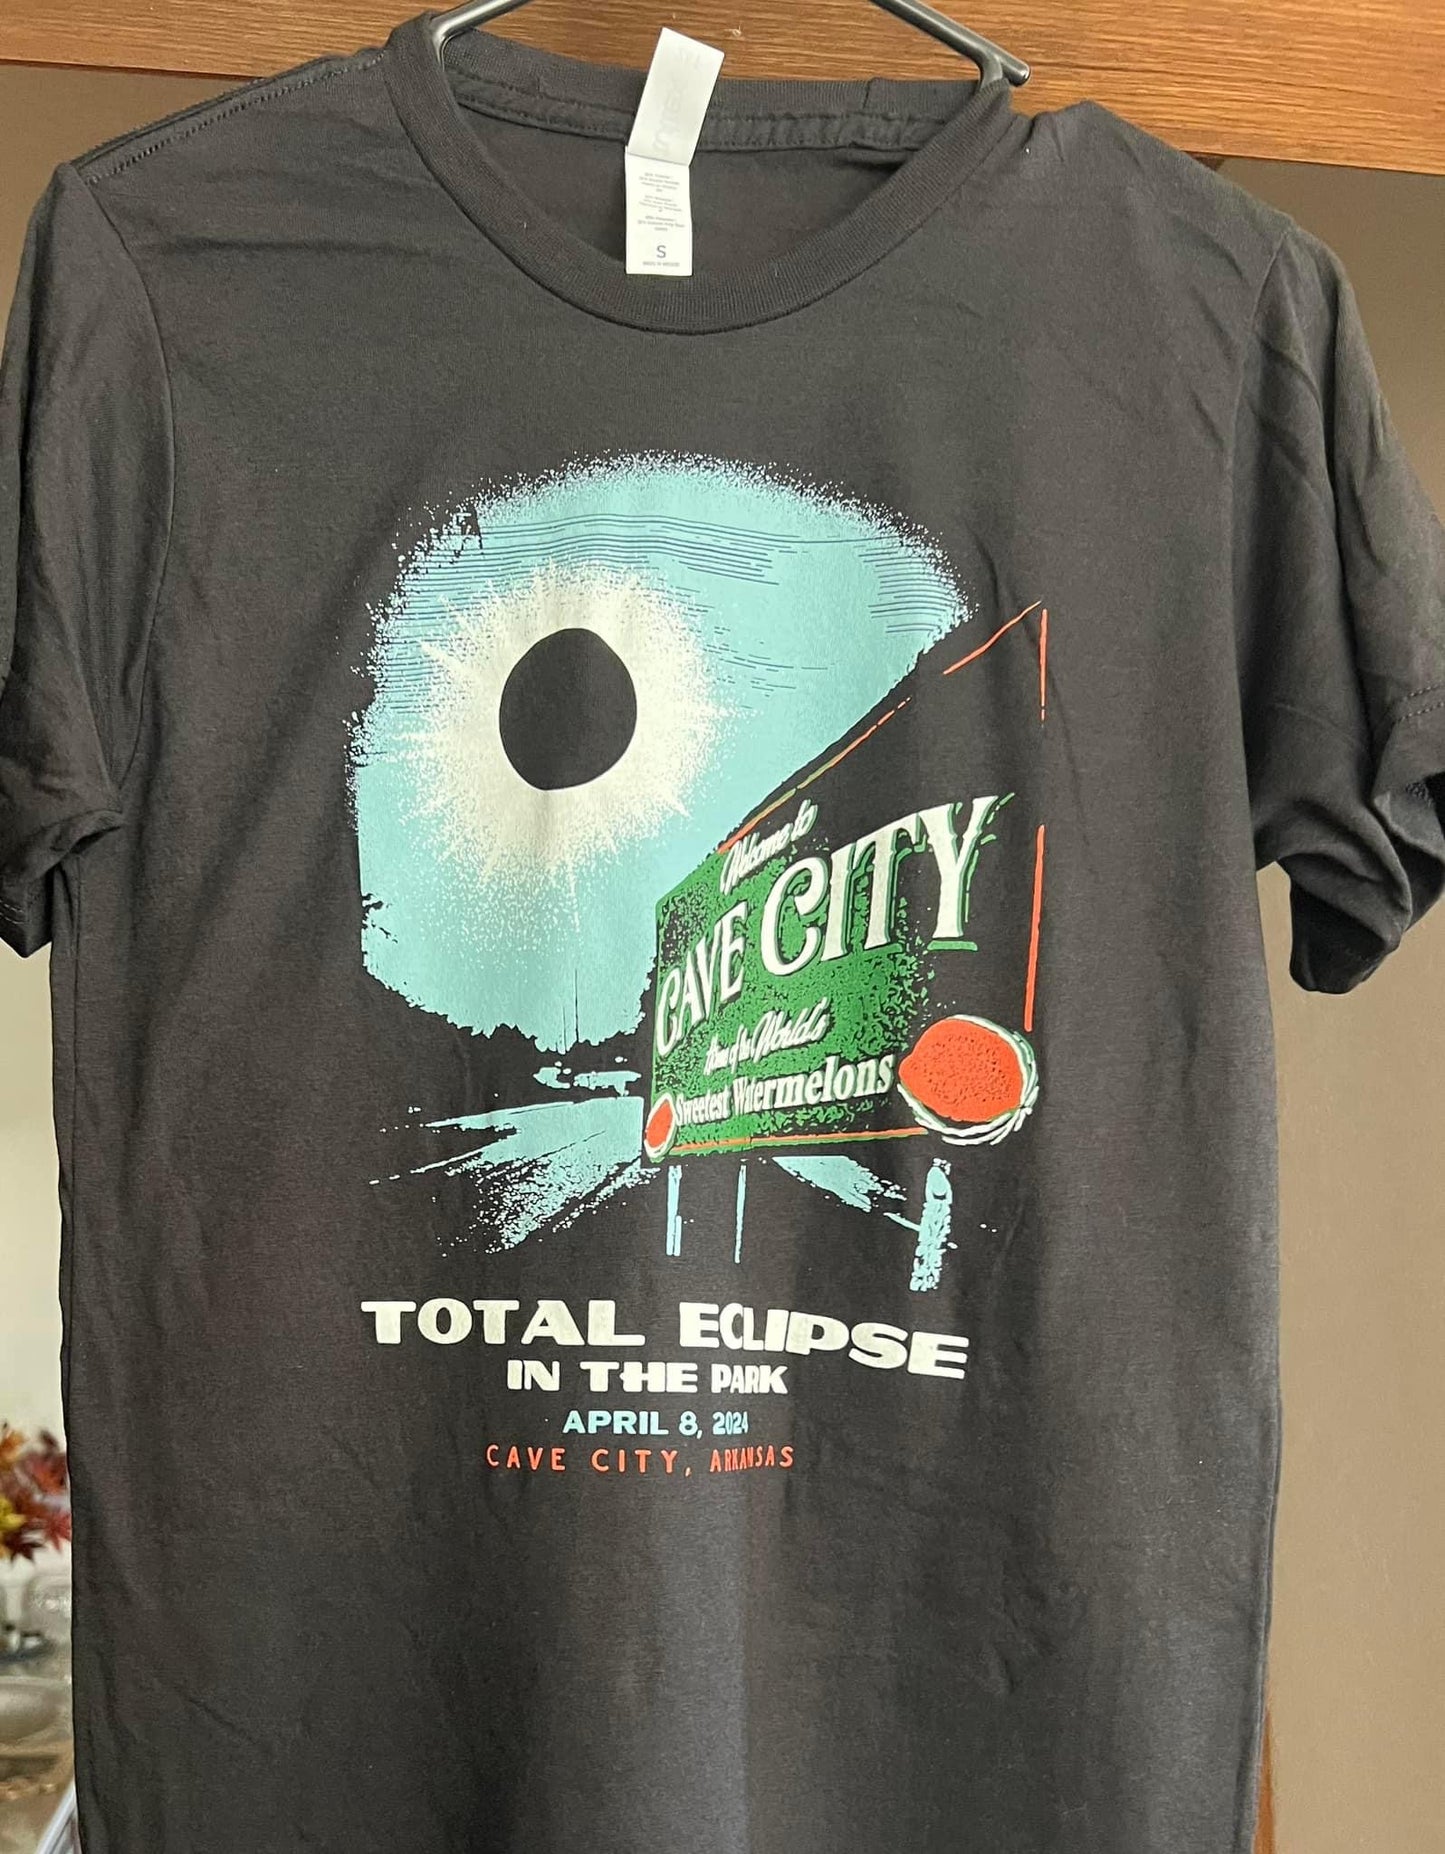 Cave City Total Eclipse Tee